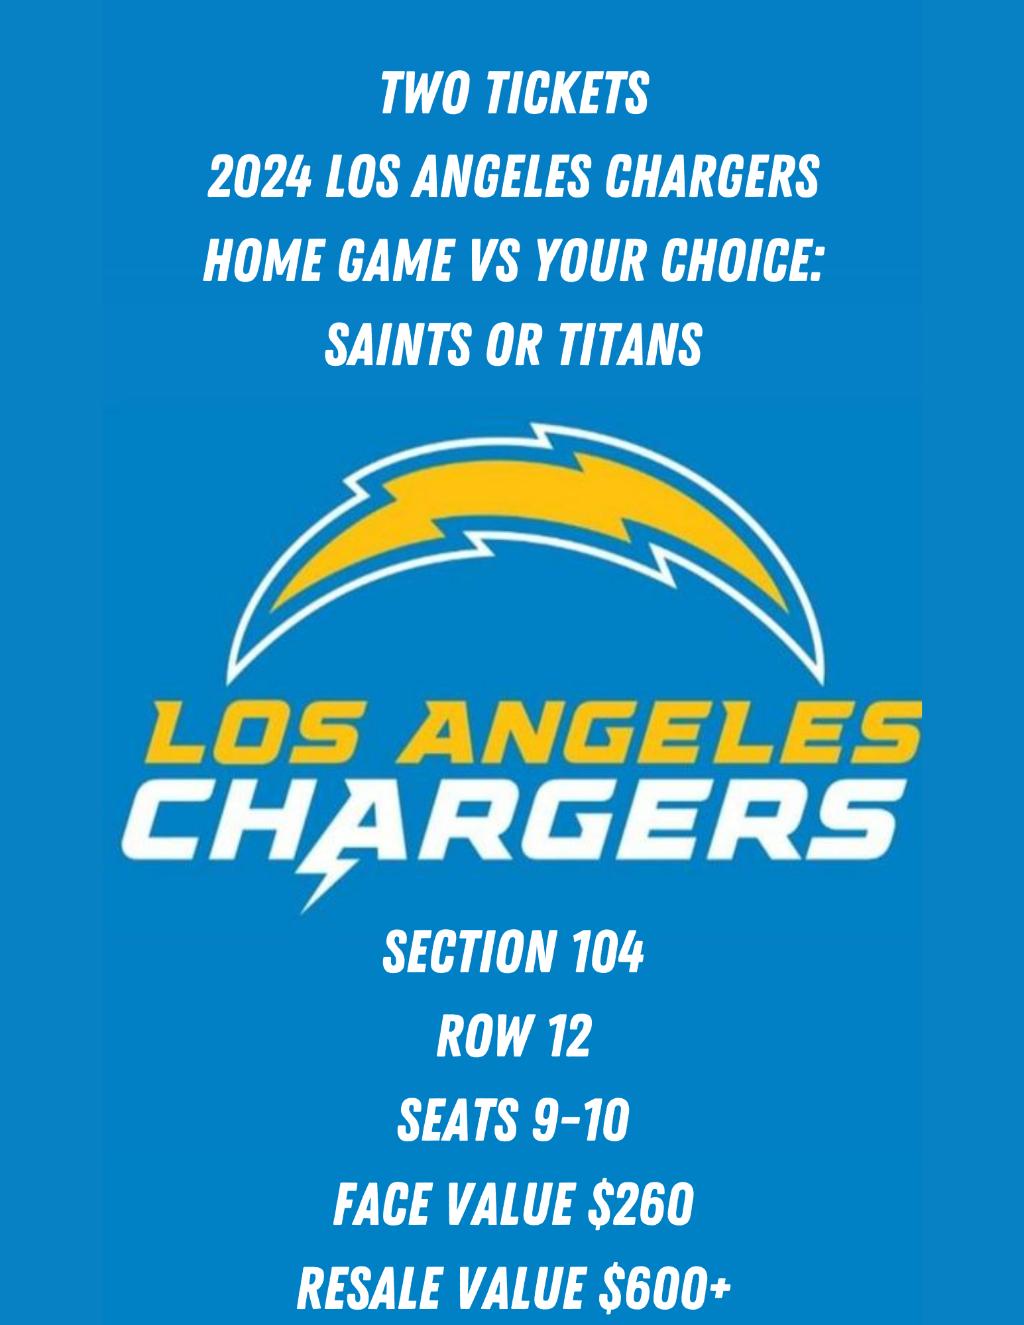 2024 Los Angeles Chargers Tickets